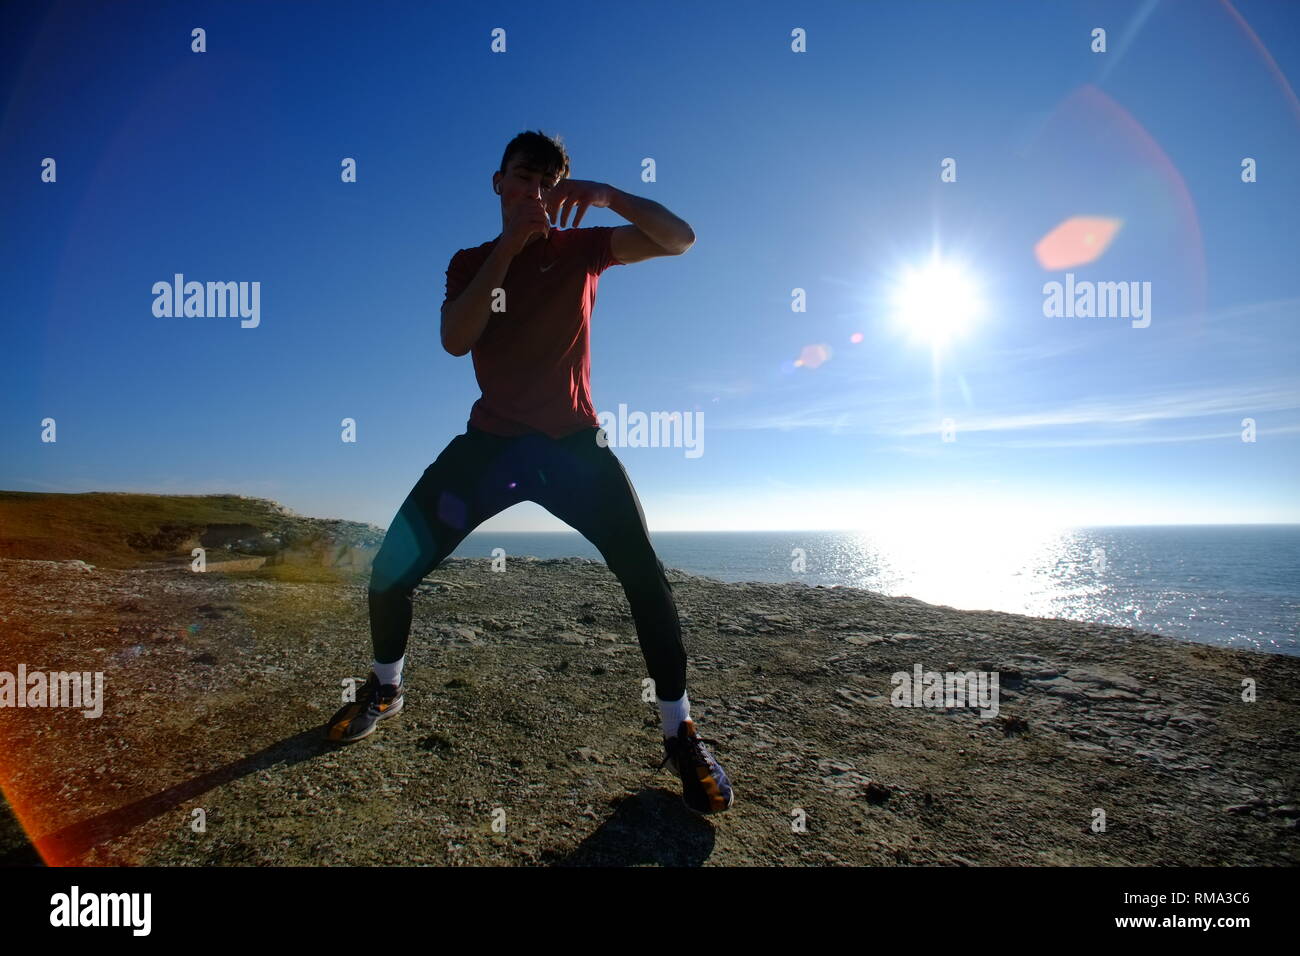 Seaford, East Sussex, UK. 14th Feb, 2019. People enjoying the bright warm sunshine on Seaford Beach, pictured is Sonny Parkinson shadow boxing on the chalk cliffs above Seaford. Credit: Peter Cripps/Alamy Live News Stock Photo